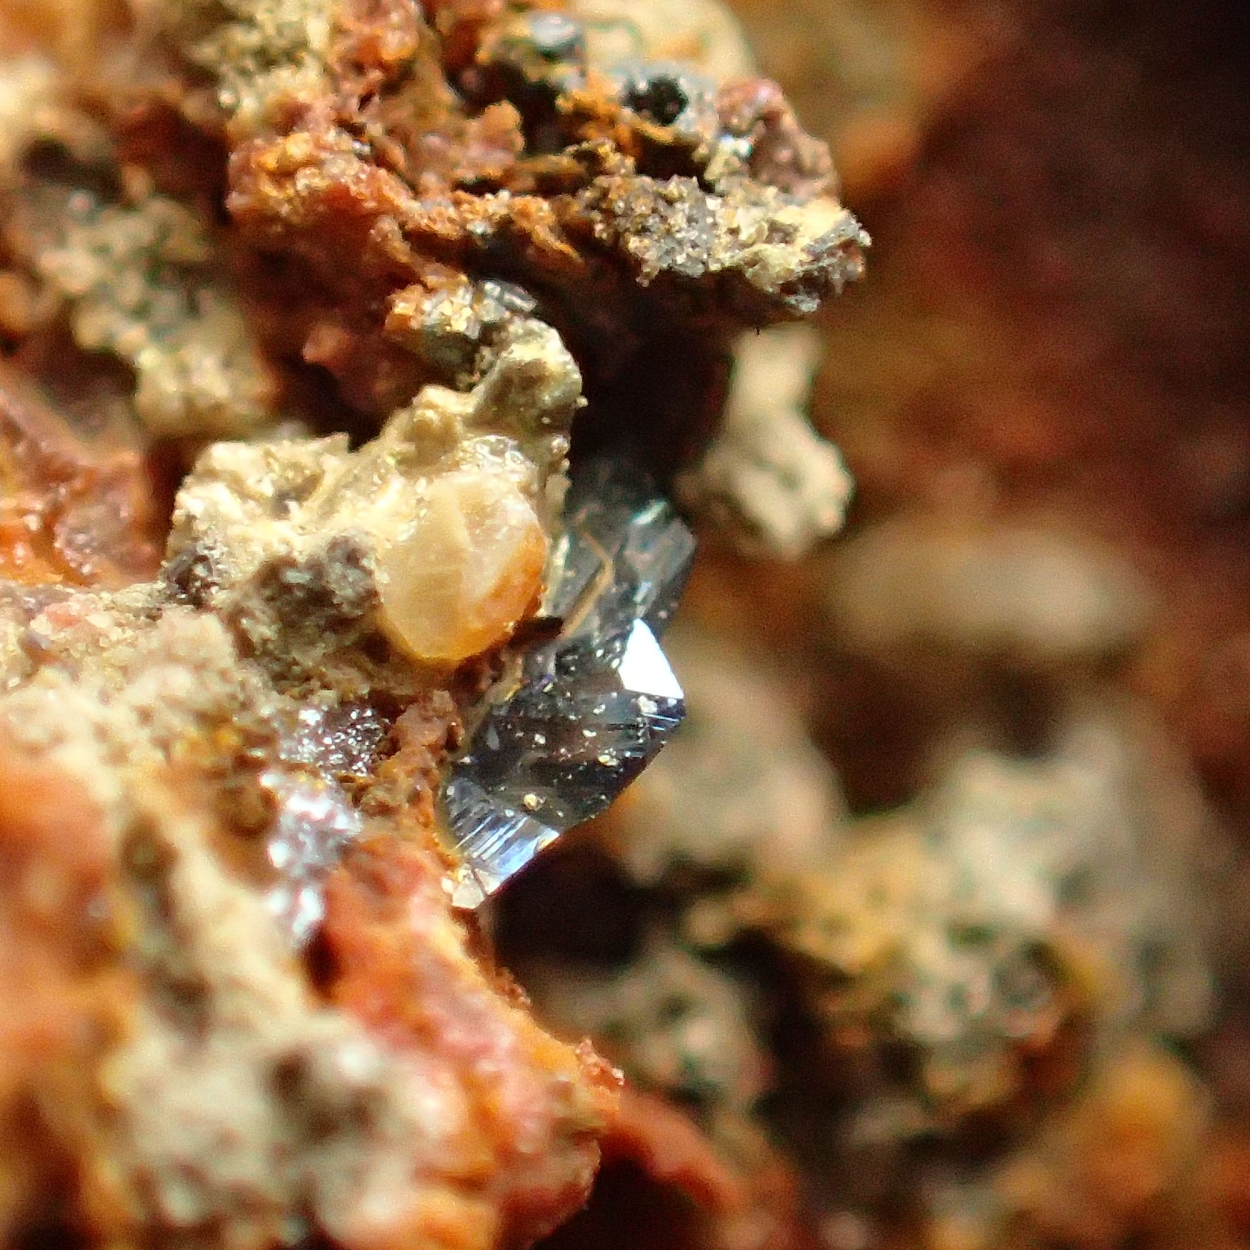 Stephanite With Proustite